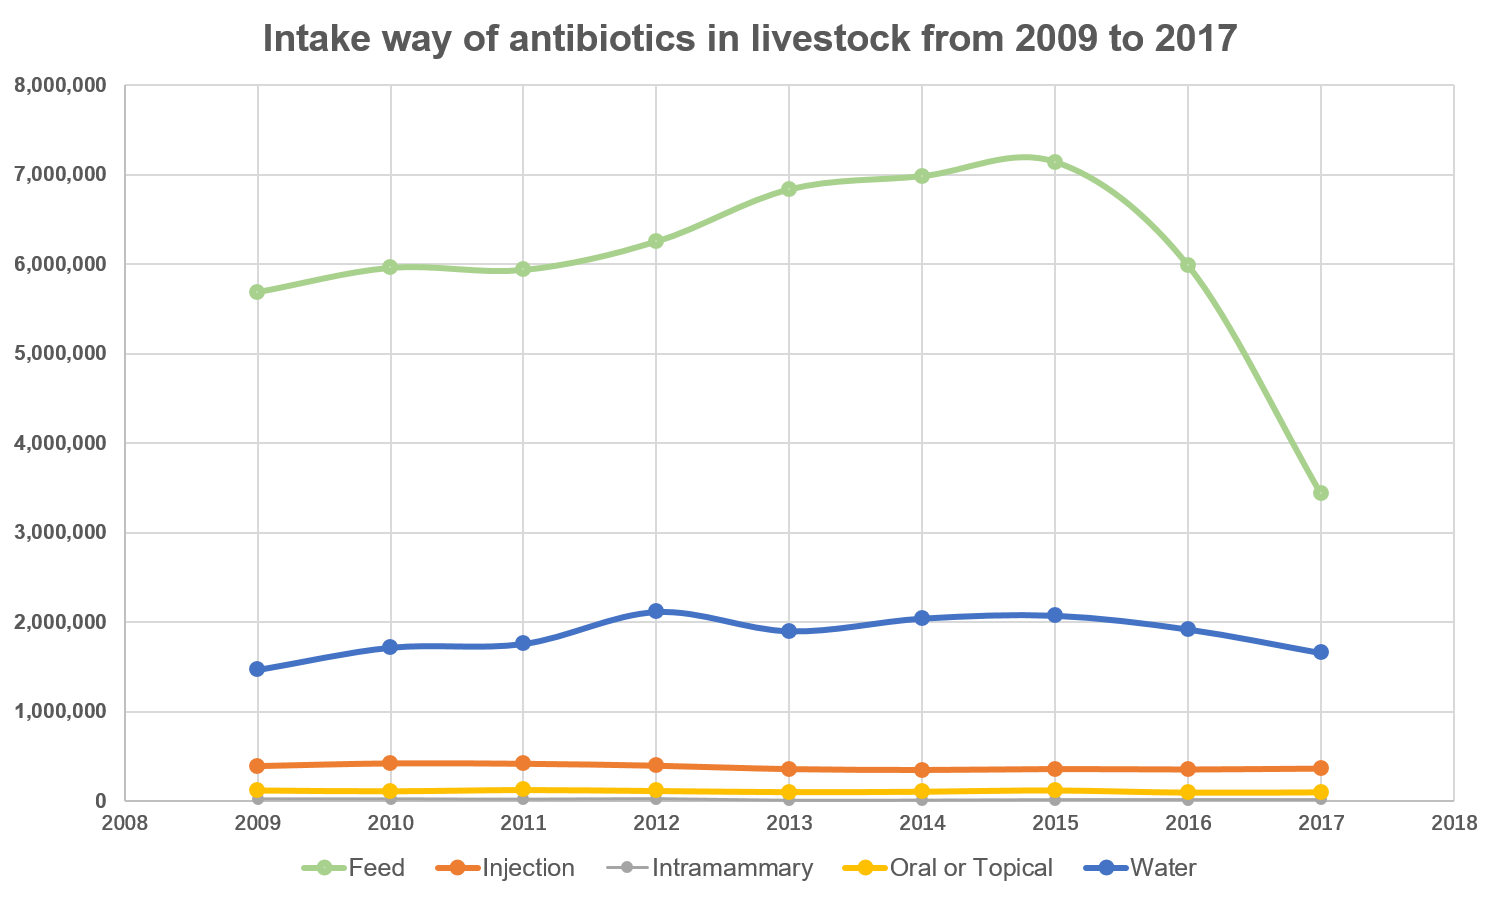  intake way of antibiotics in livestock from 2009 to 2017